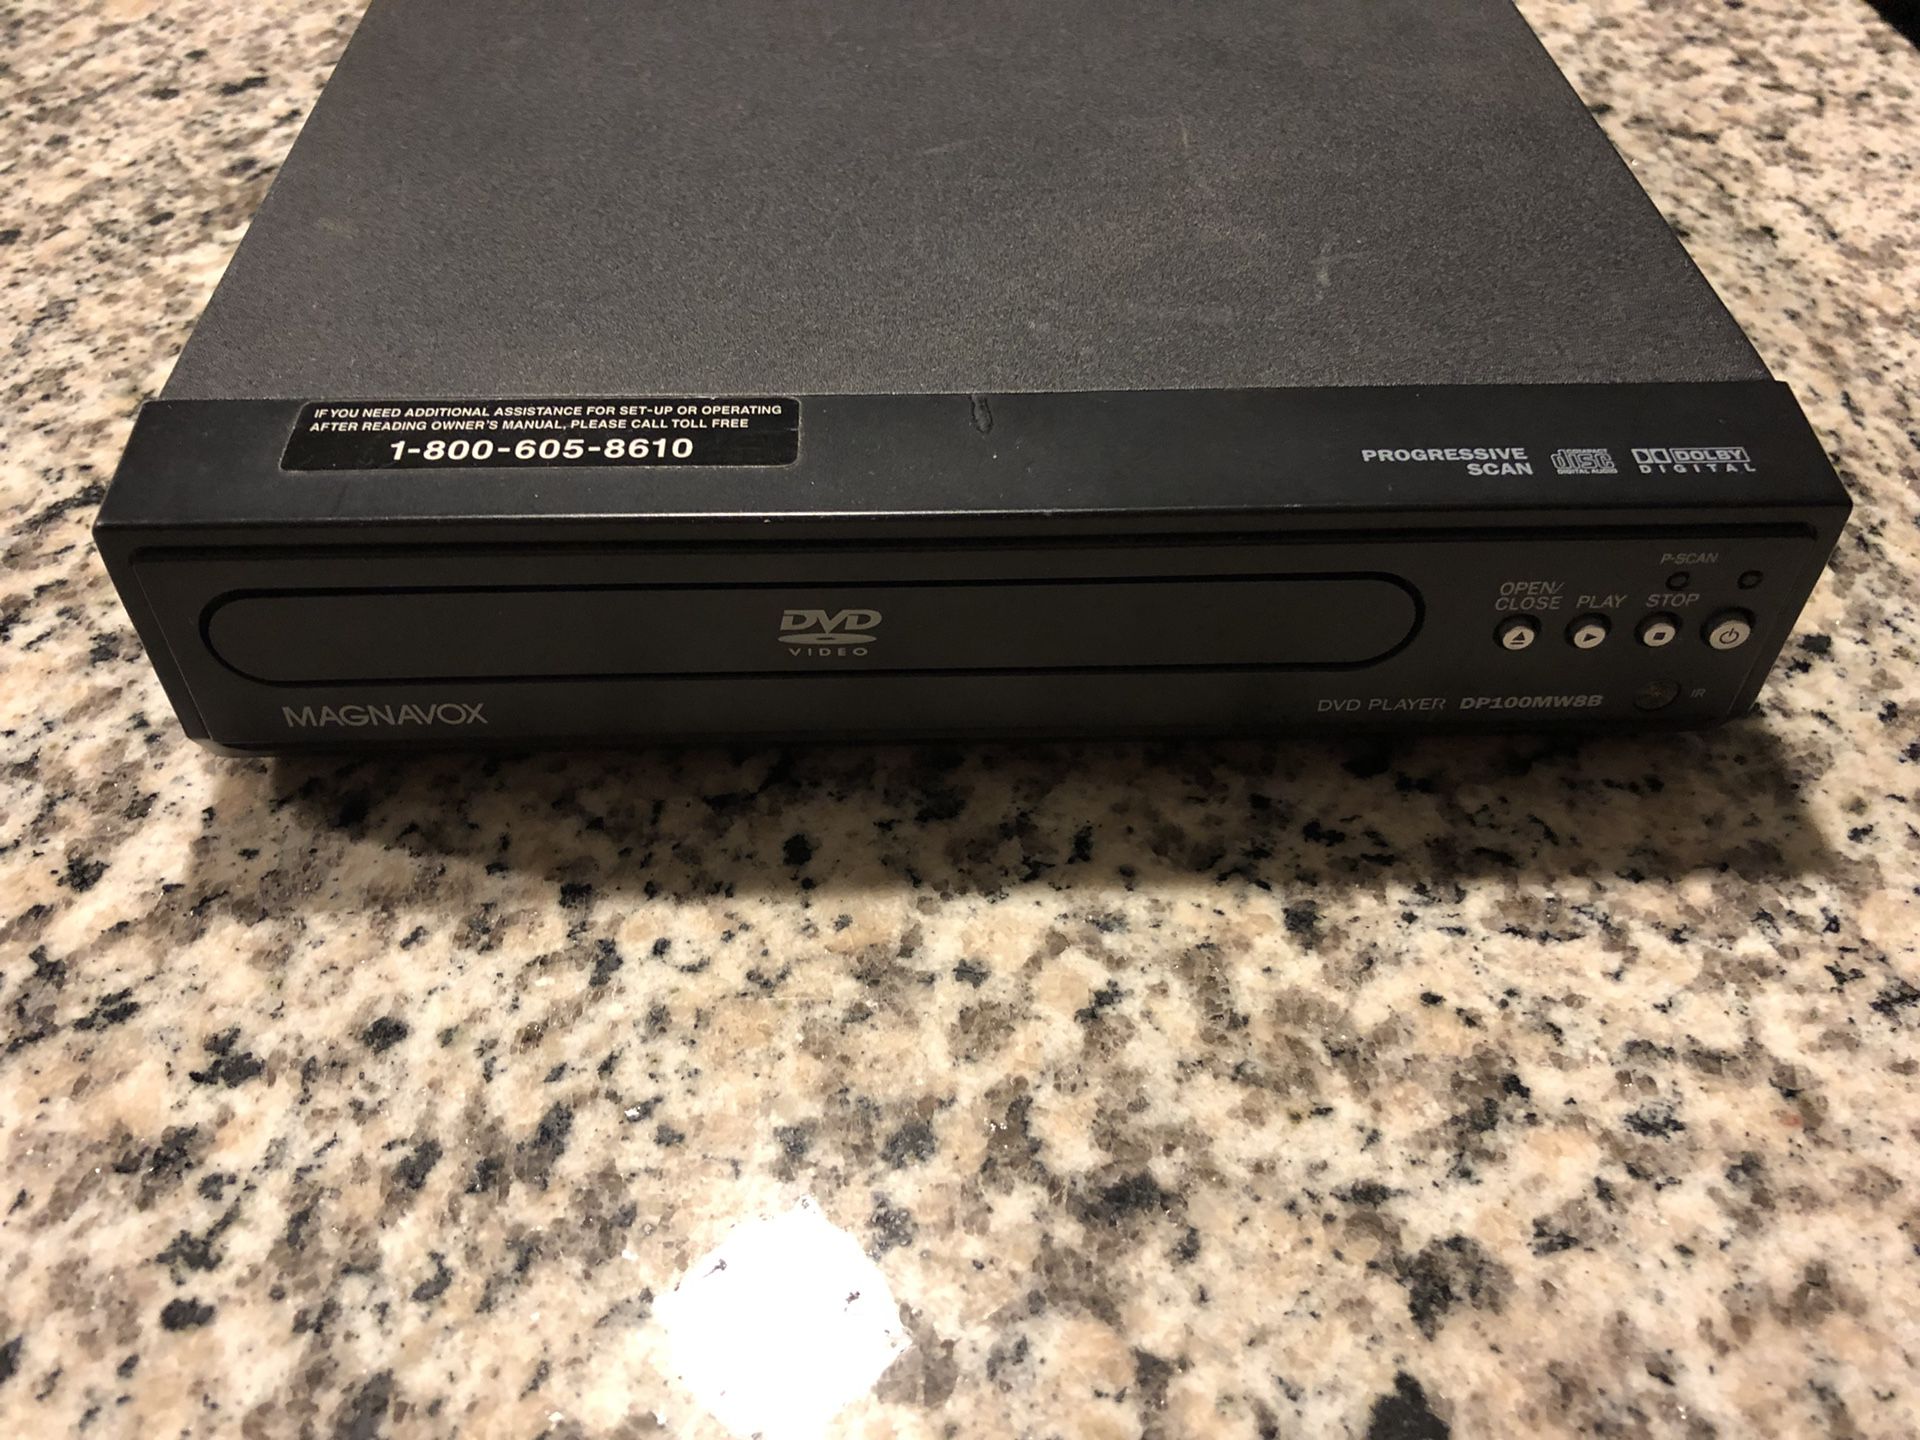 Magnavox DVD player without remote